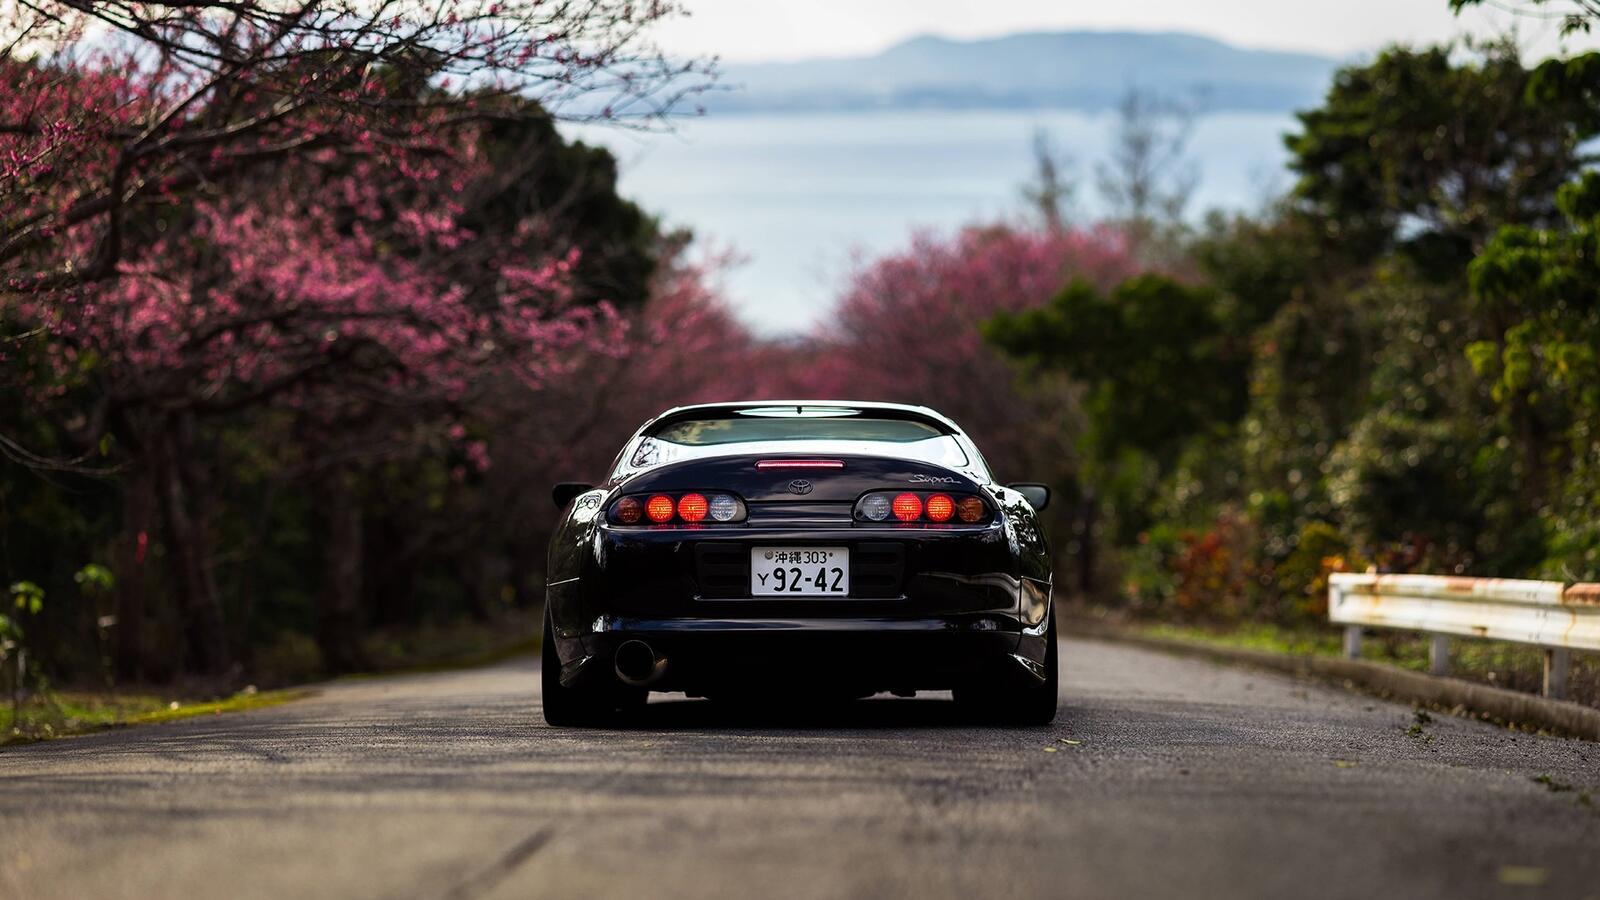 Wallpapers Toyota Supra view from behind supercars on the desktop